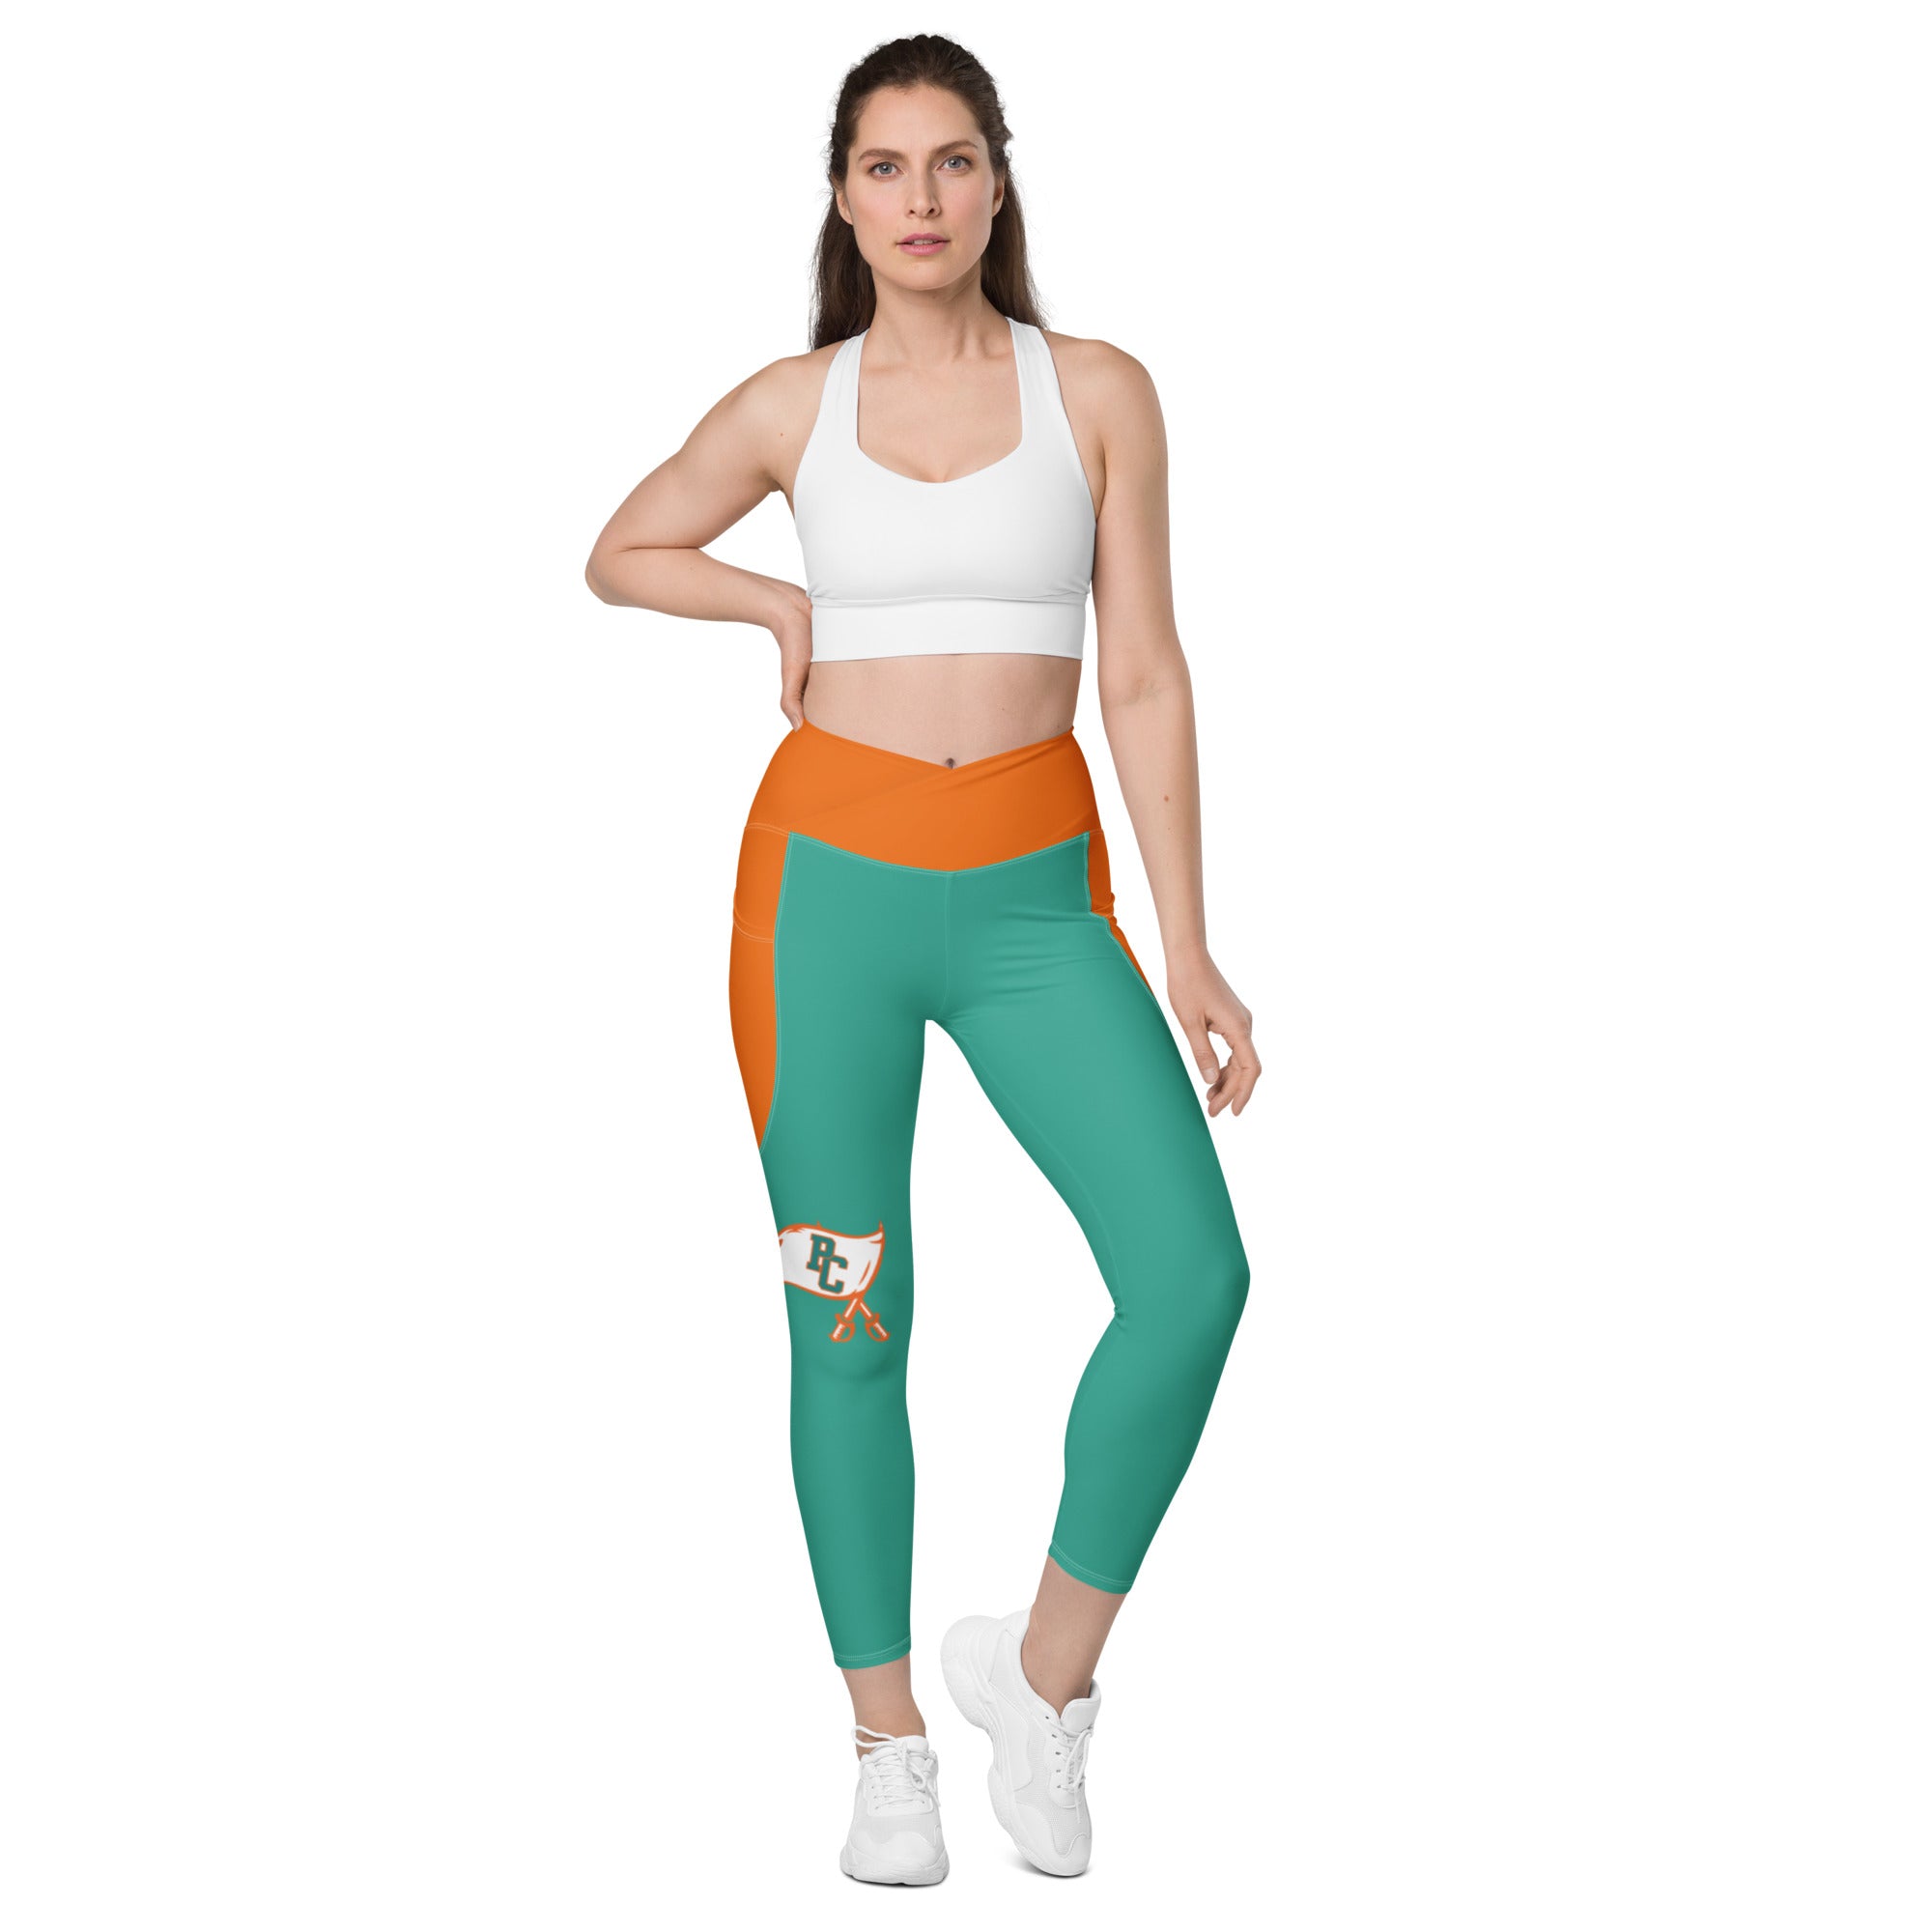 Plant City Raiders Crossover Leggings with pockets - Peachy Brass